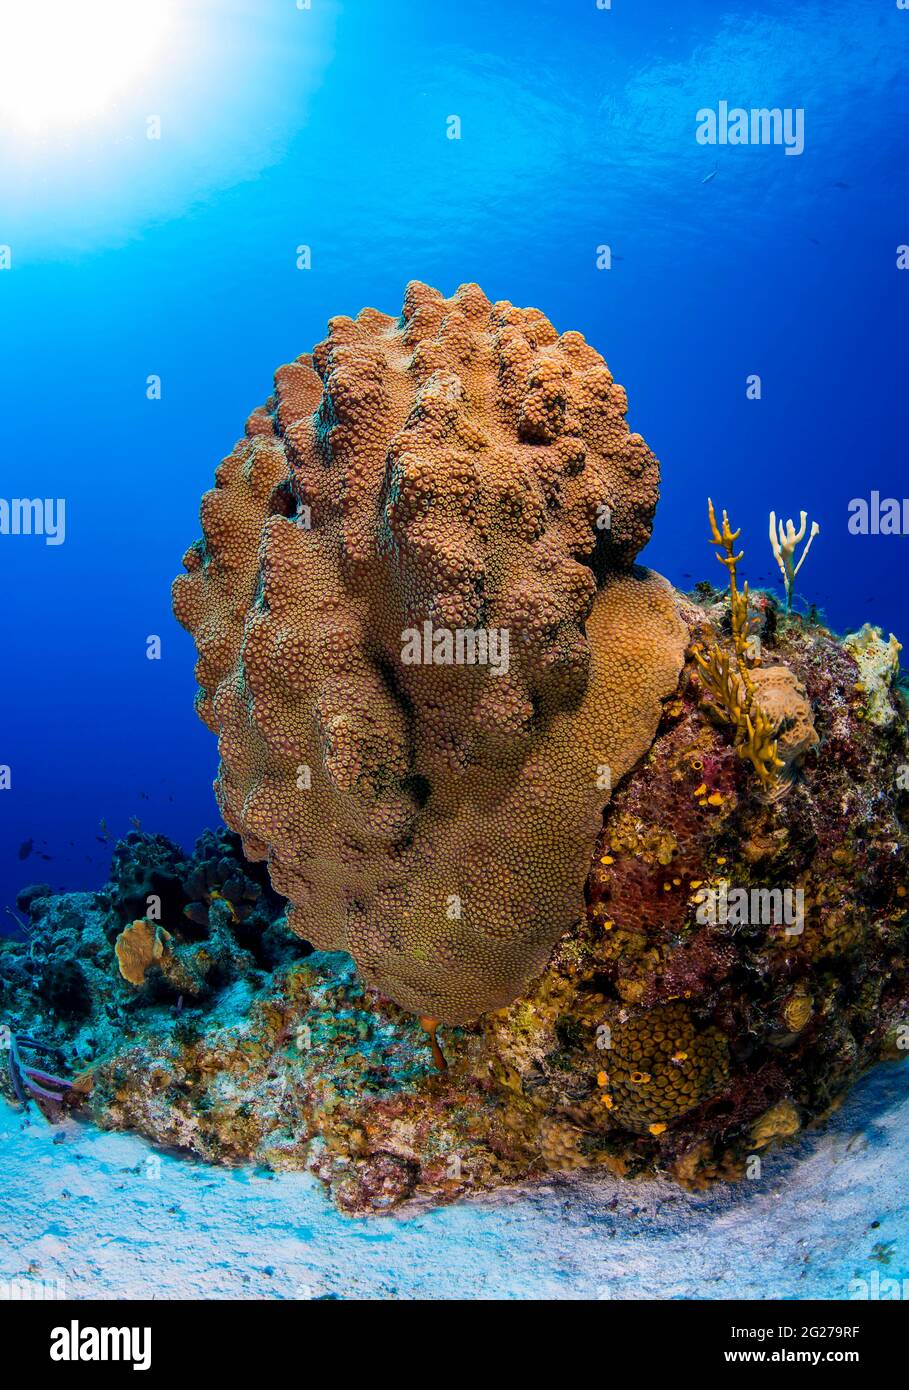 Healthy mountainous star coral (Orbicella faveolata) display in Turks and Caicos Islands. Stock Photo